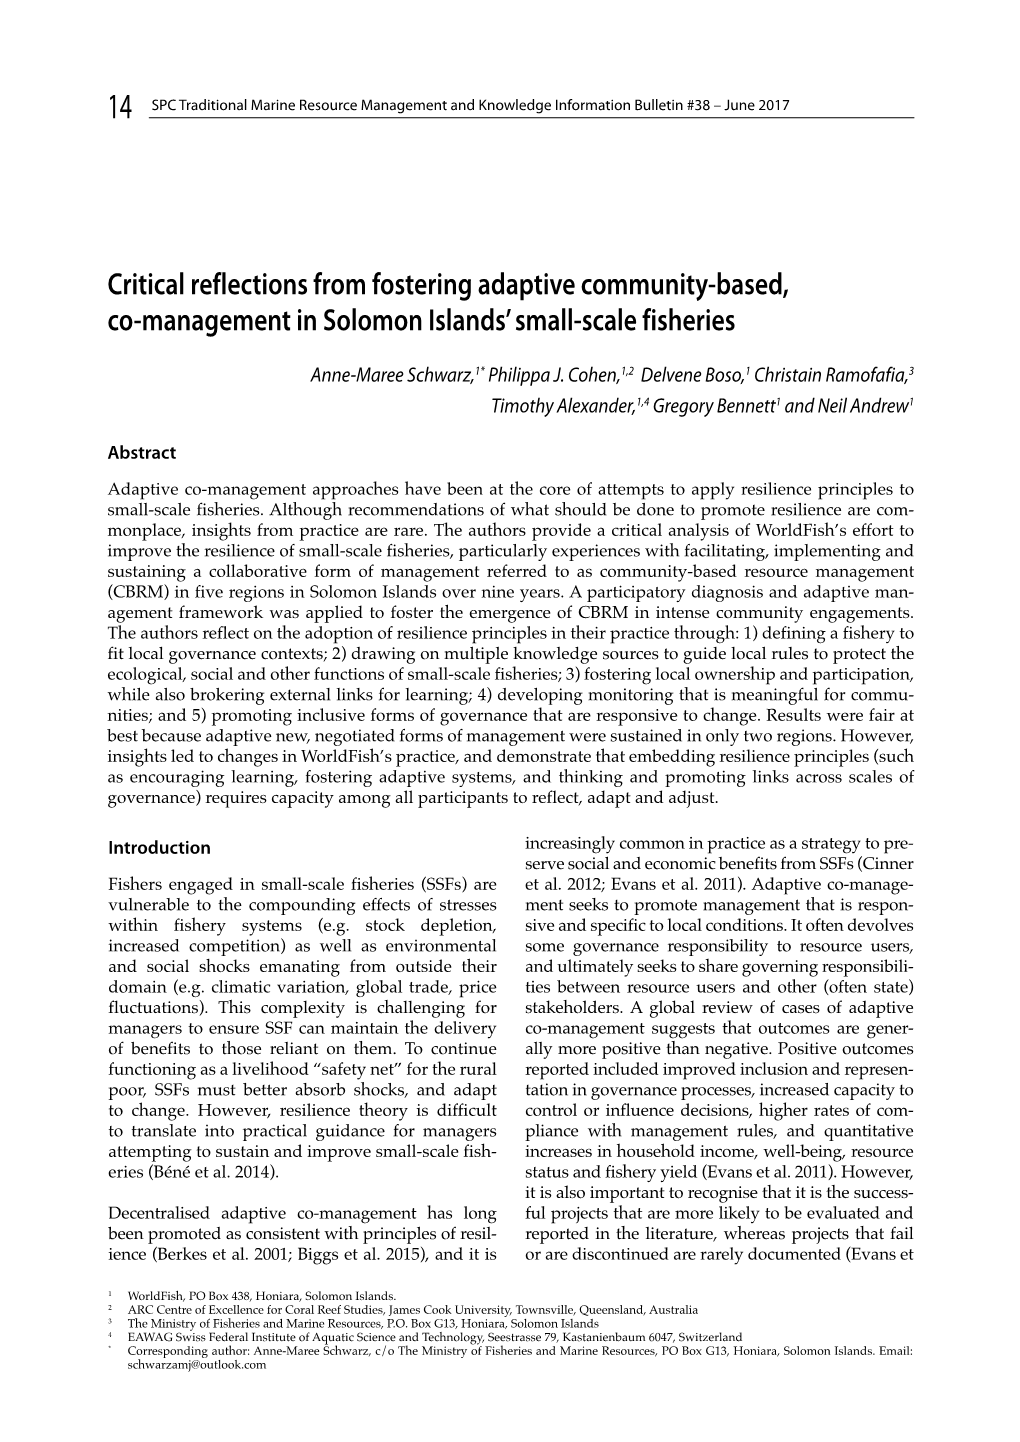 Critical Reflections from Fostering Adaptive Community-Based, Co-Management in Solomon Islands’ Small-Scale Fisheries